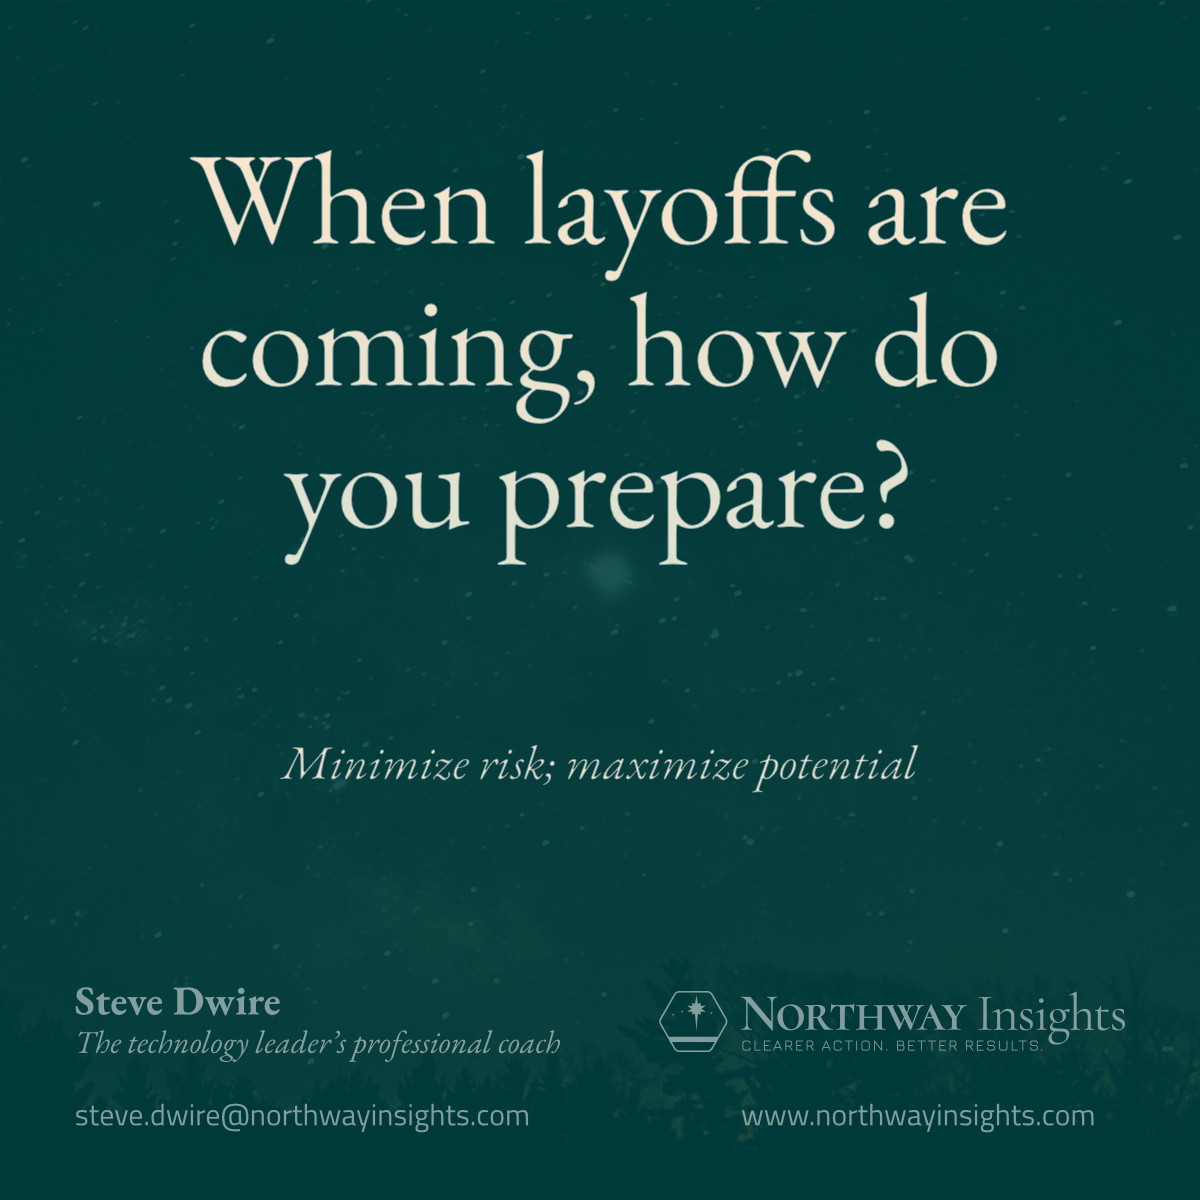 When layoffs are coming, how do you prepare?